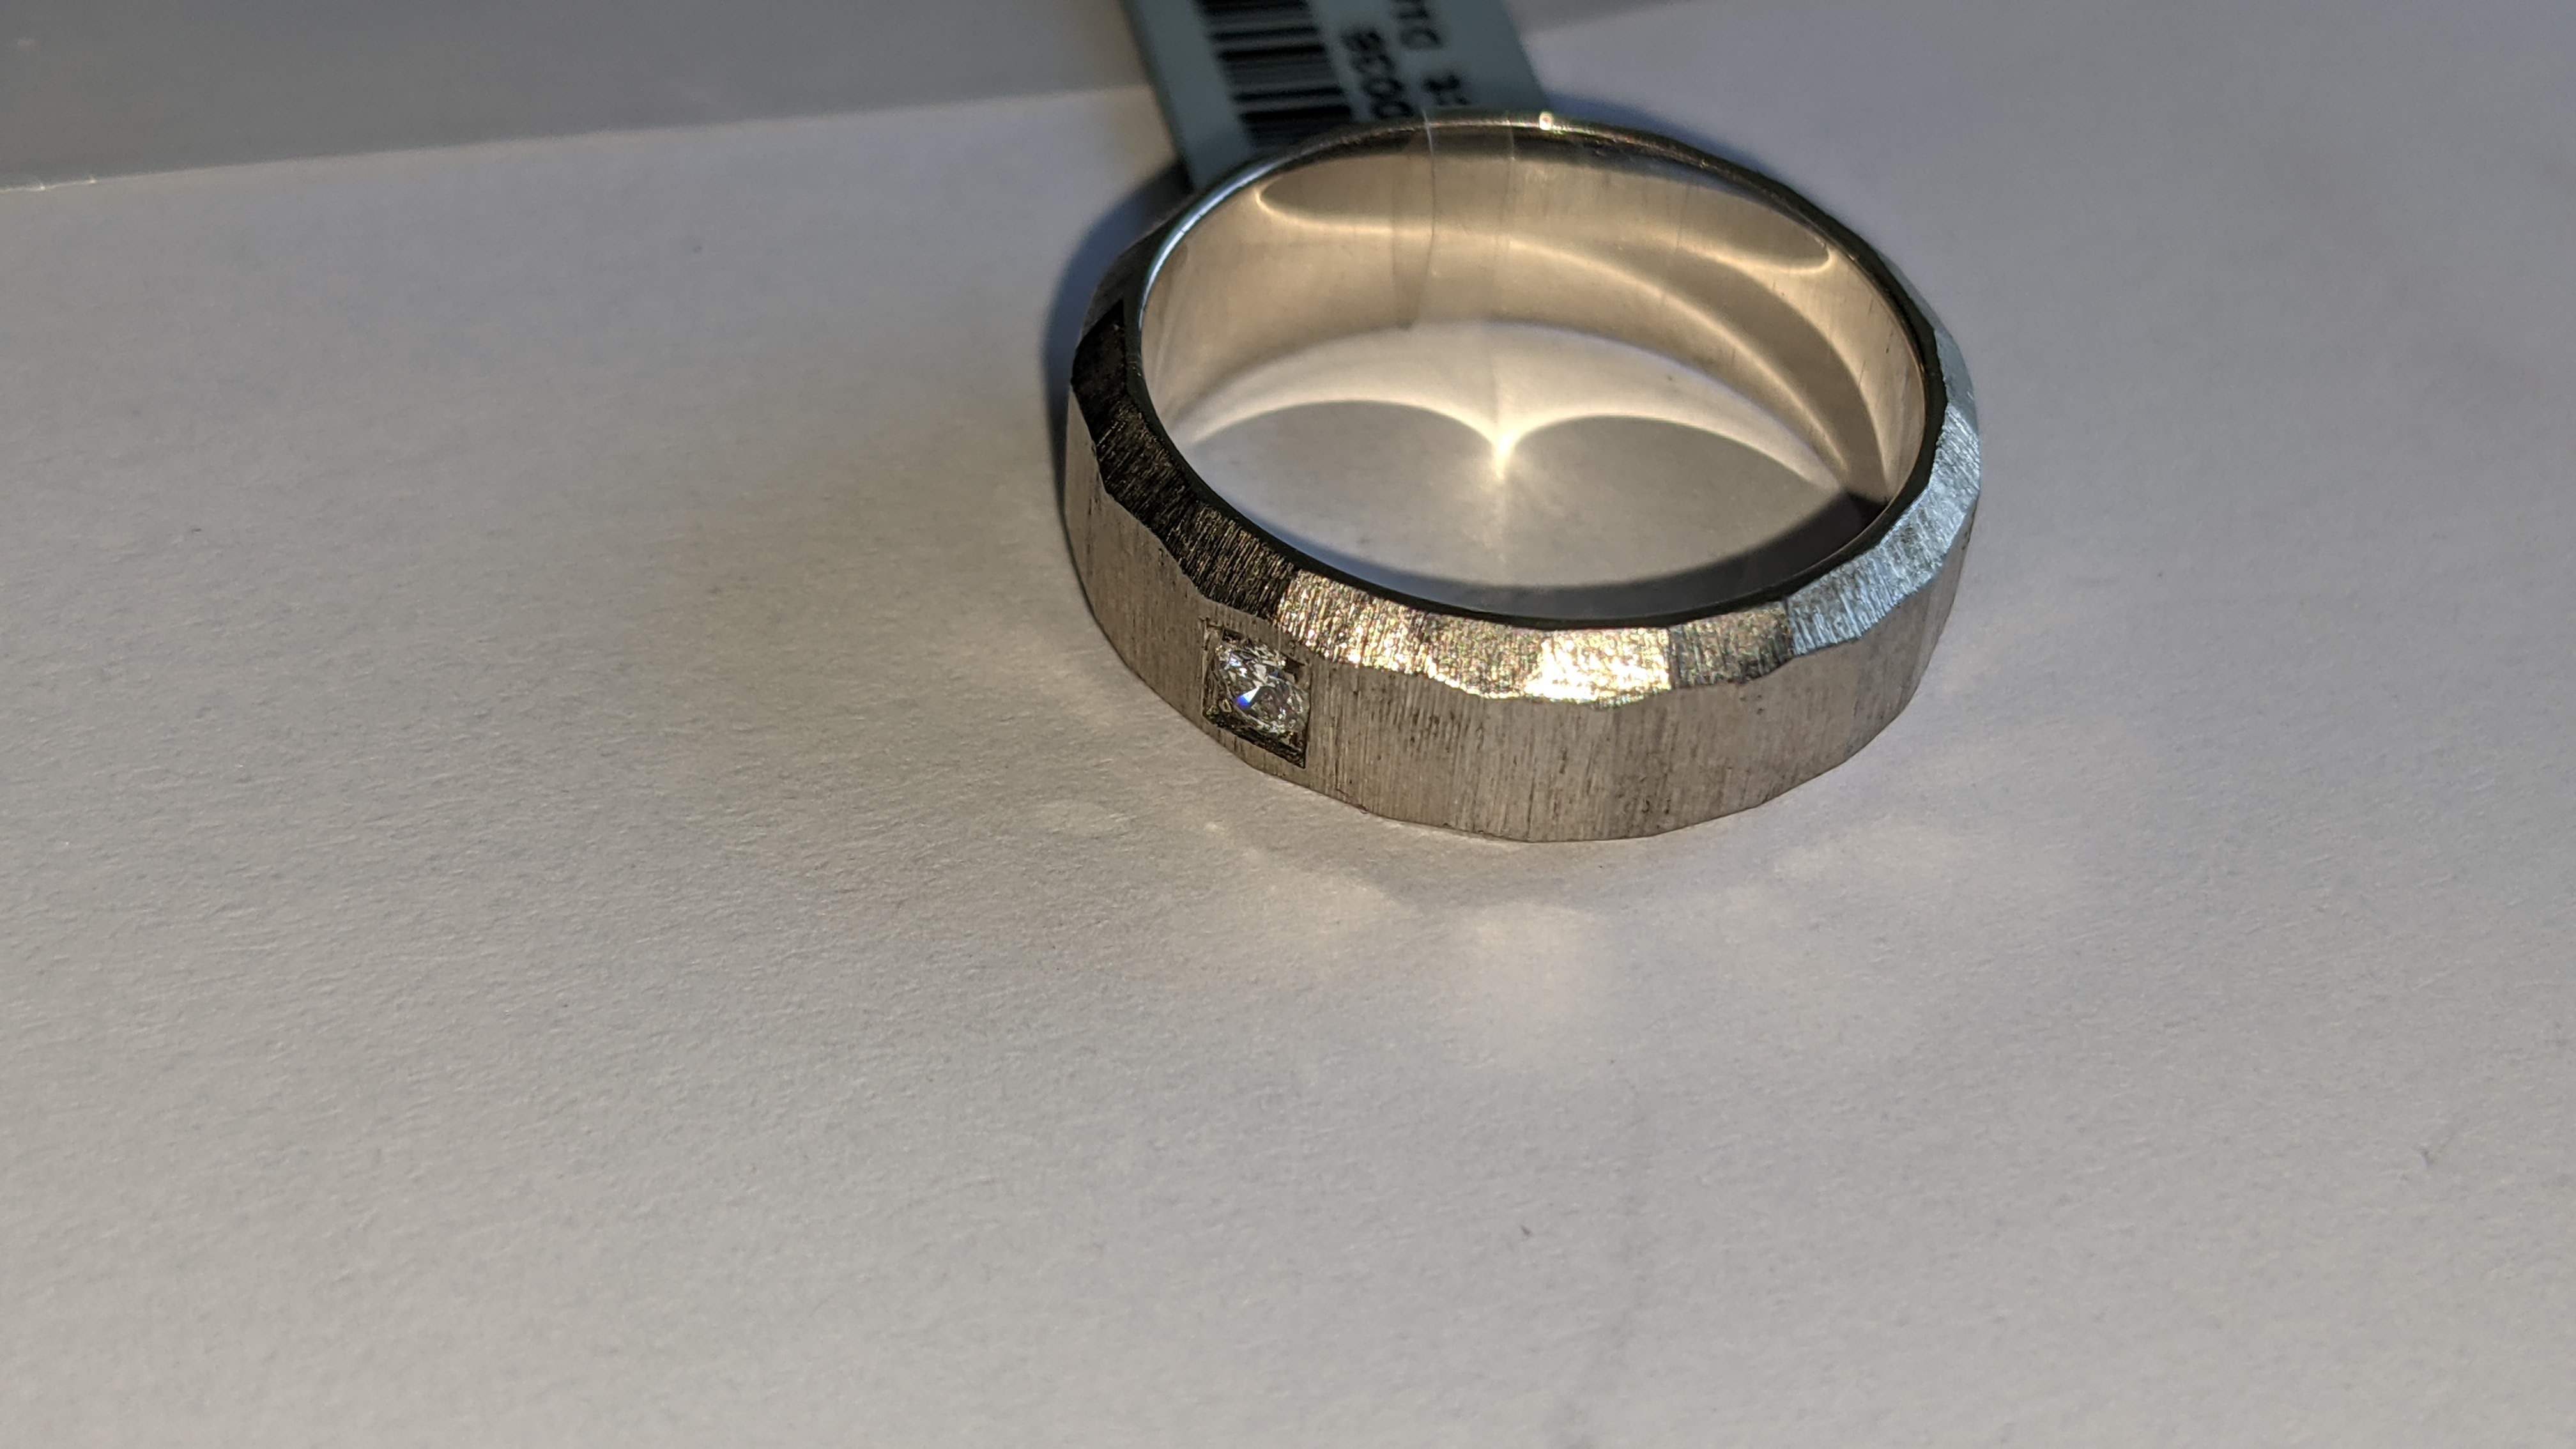 Platinum 950 unusually faceted Palladium 950 ring with single diamond weighing 0.05ct. RRP £1,220 - Image 6 of 15